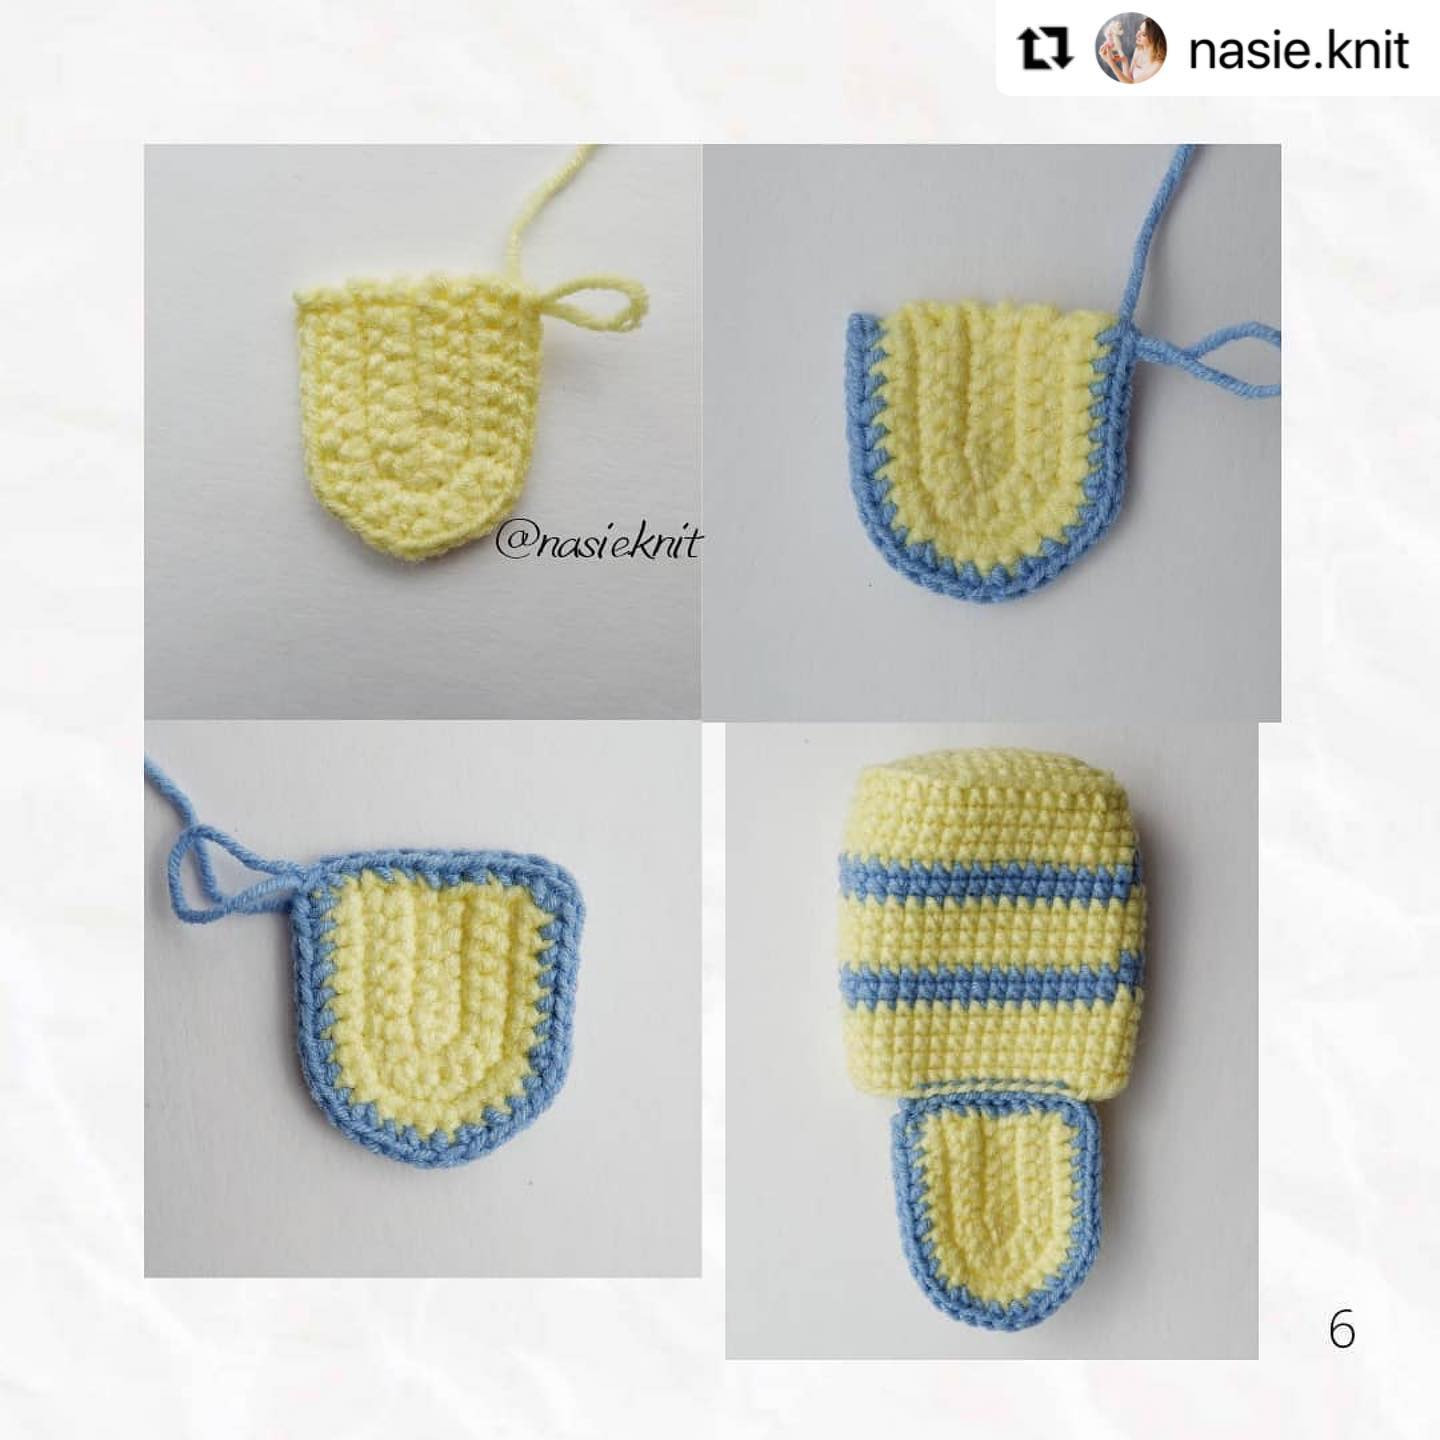 [ENG] Free crochet pattern for a toy backpack ❤️❤️❤️